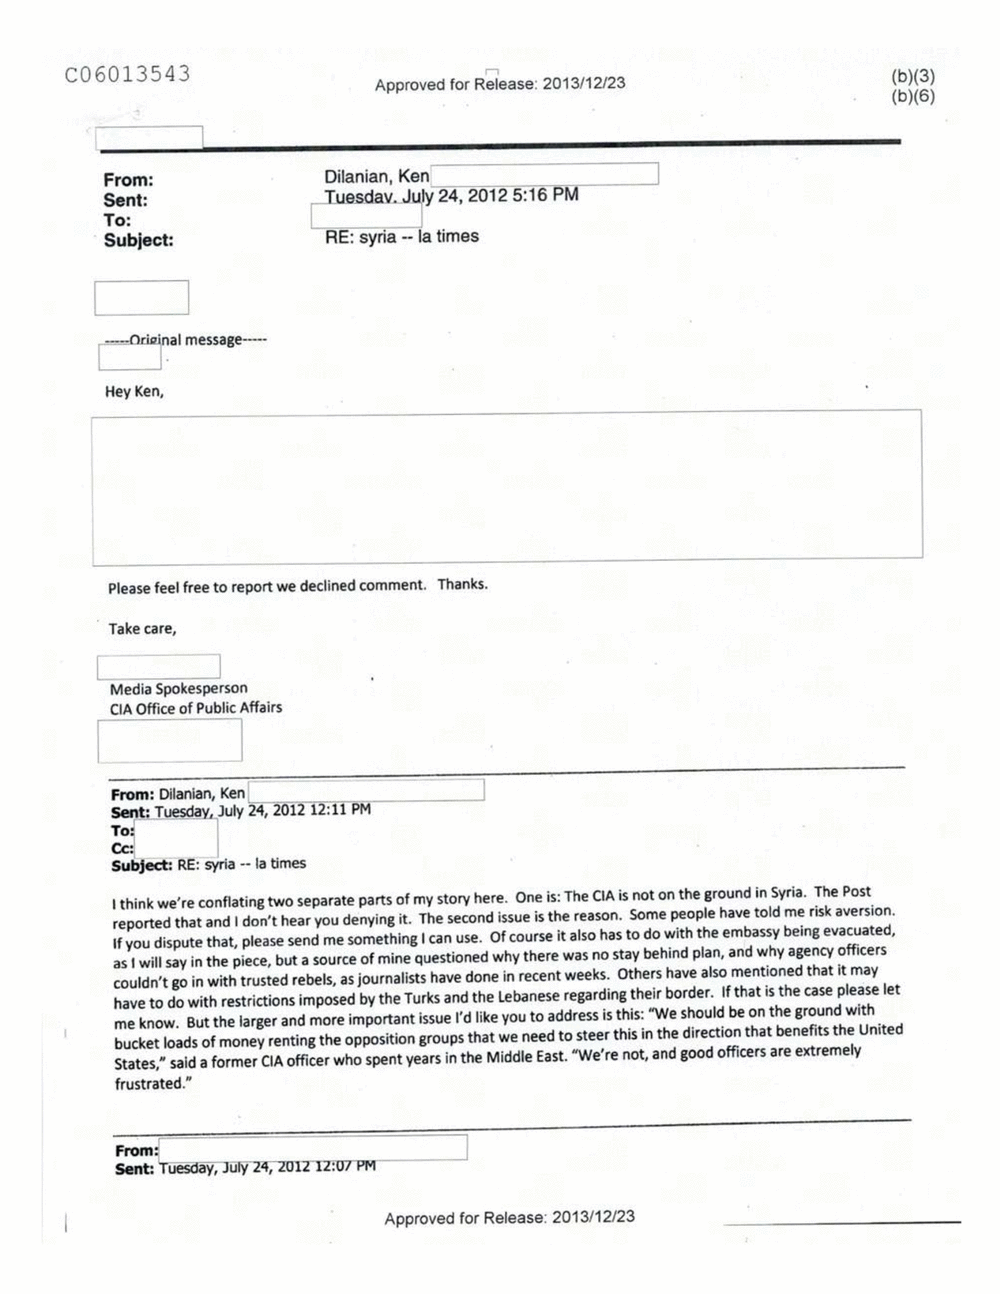 Page 403 from Email Correspondence Between Reporters and CIA Flacks